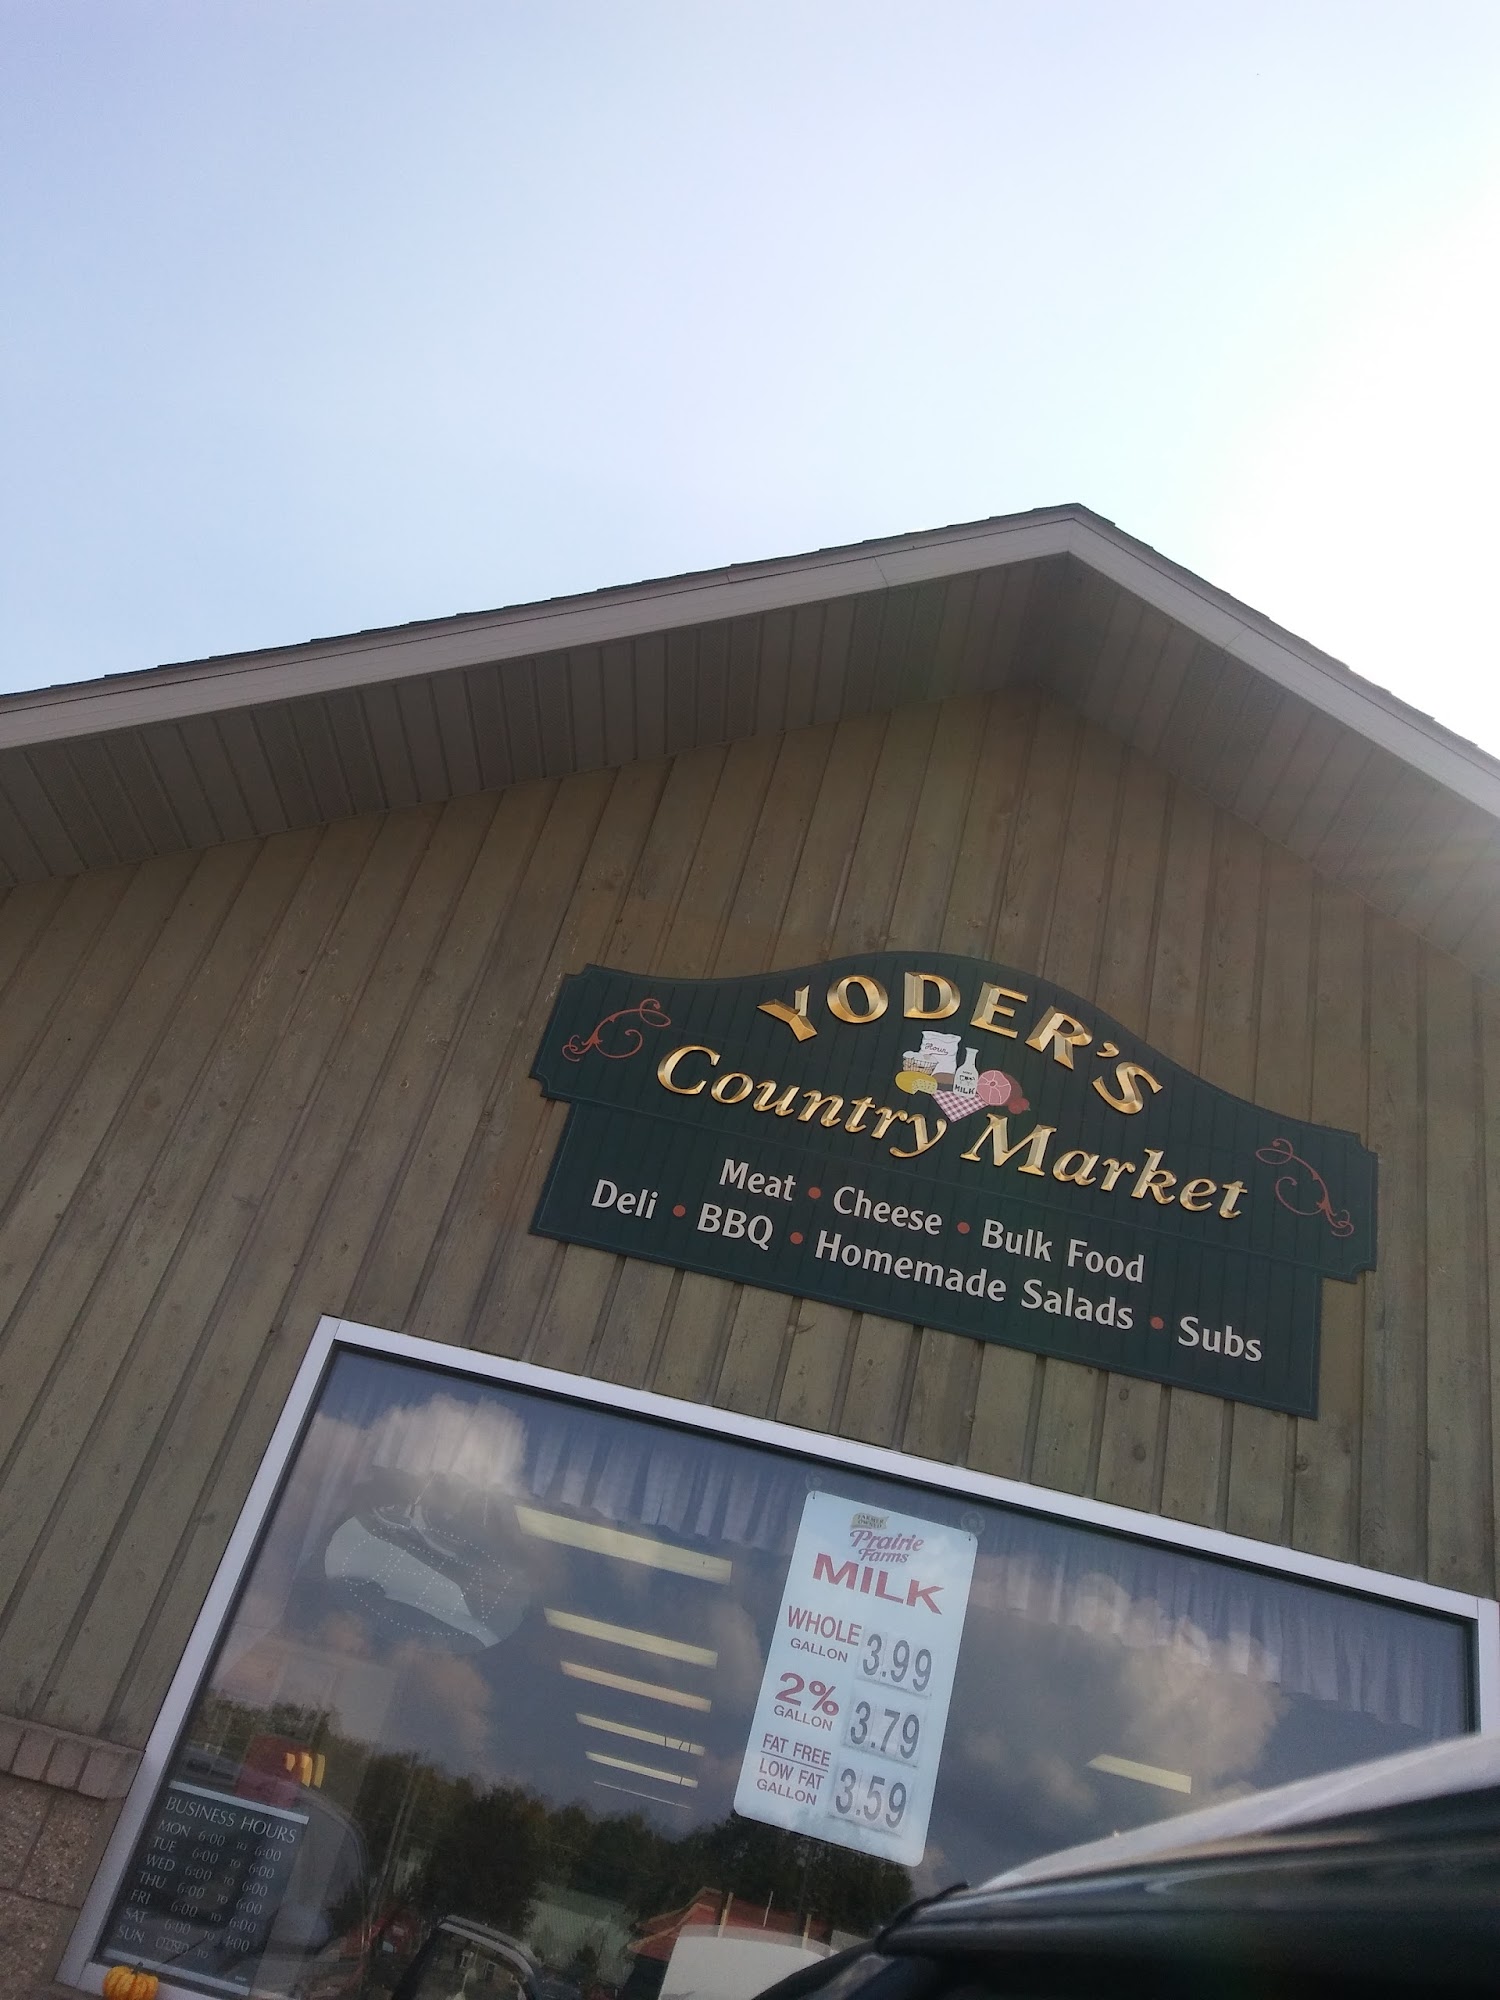 Yoder's Country Market